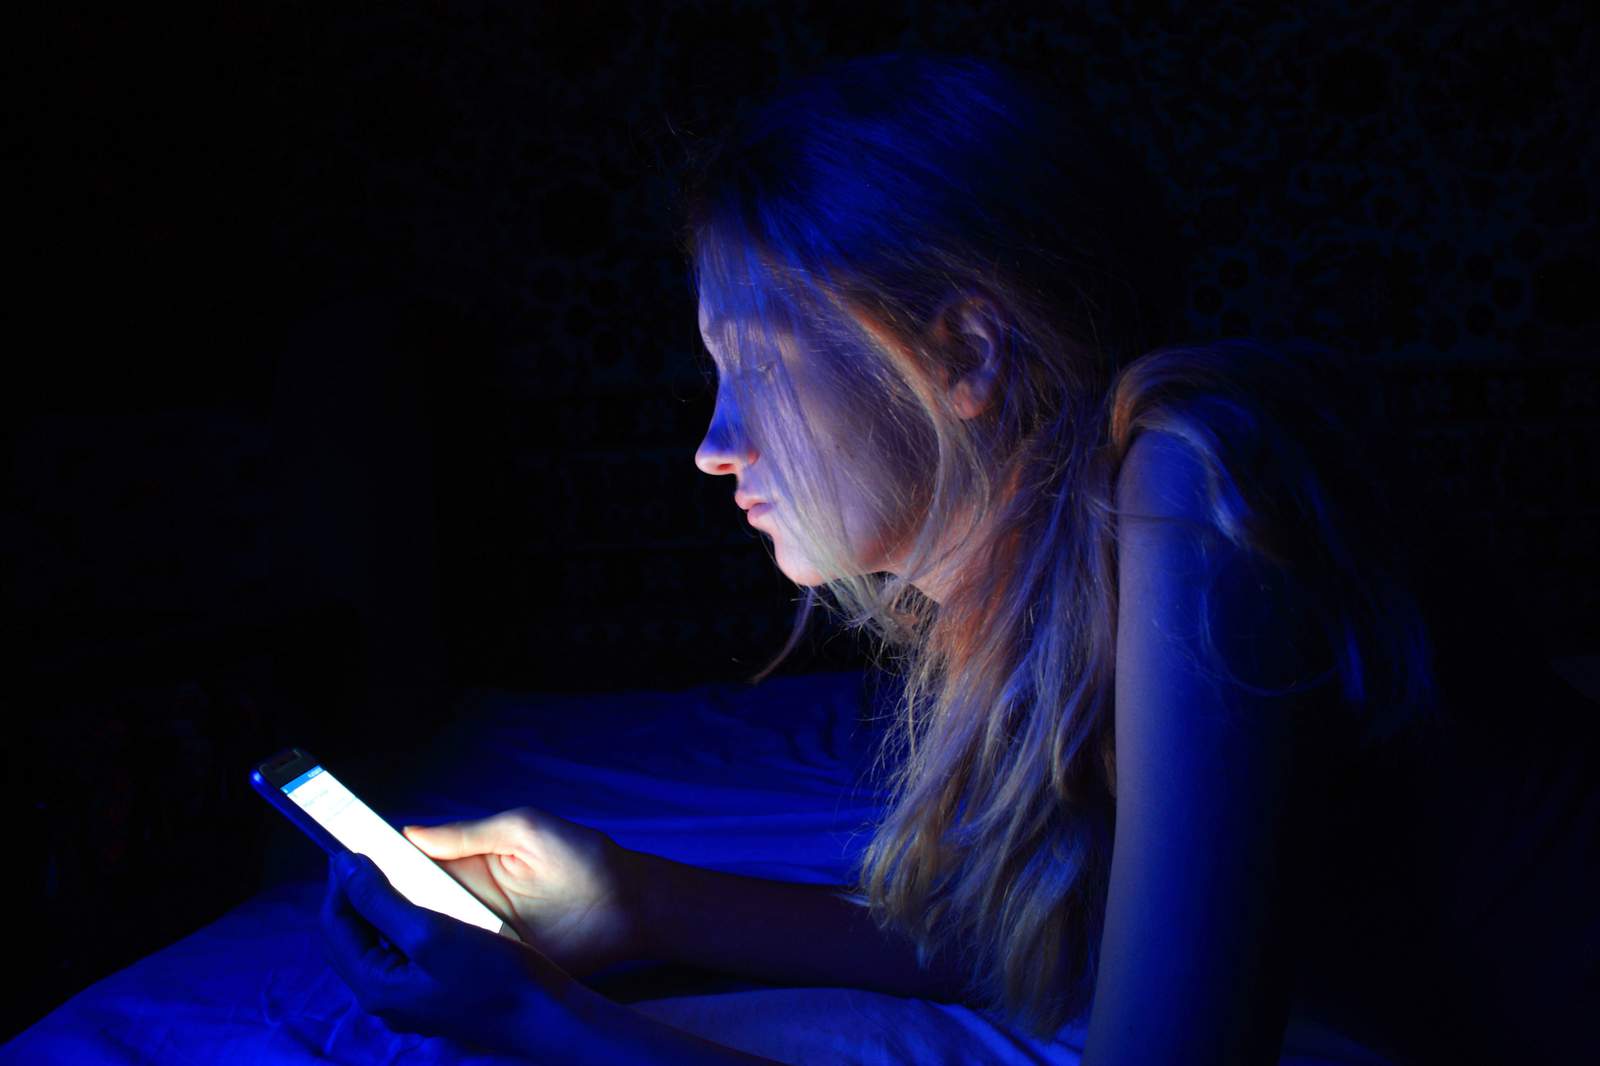 Getting more screen time? Watch out for blue light exposure risks